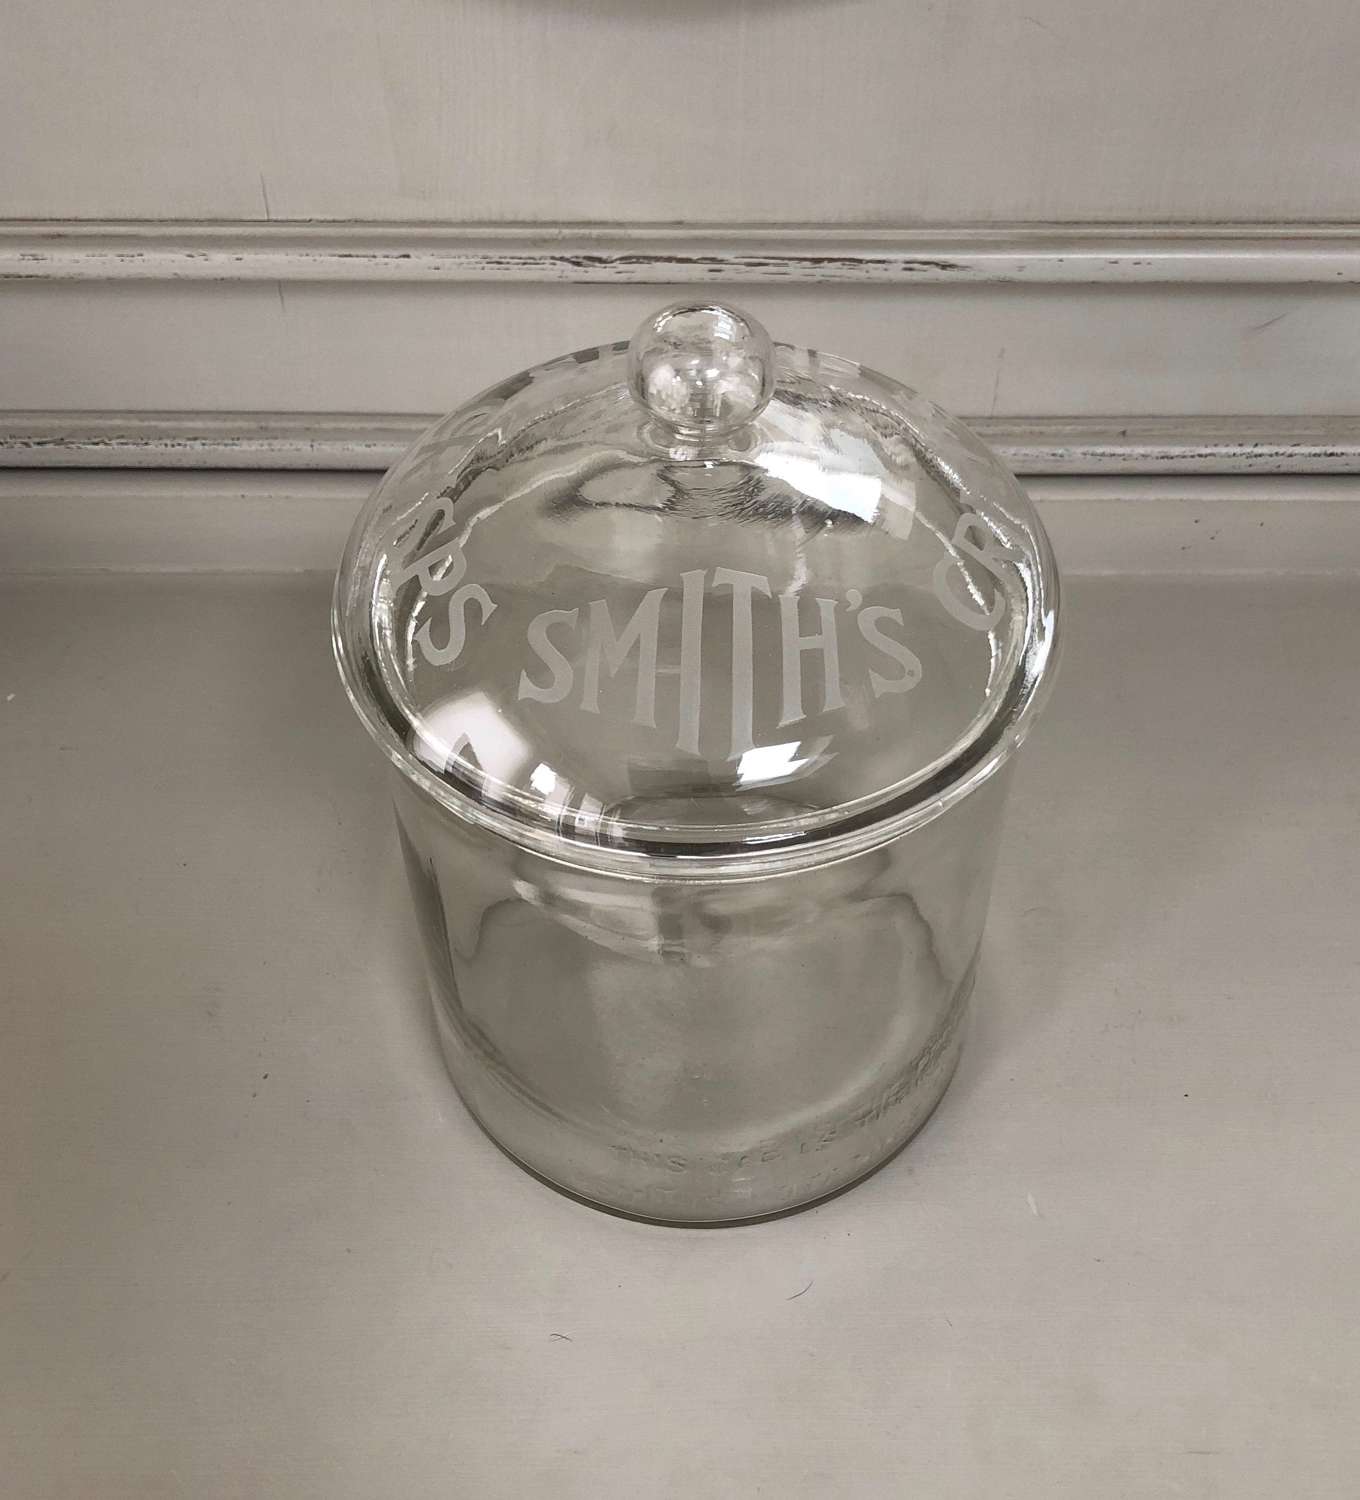 Early 20th Century Shops Etched Glass Advertising Jar - Smiths Crisps